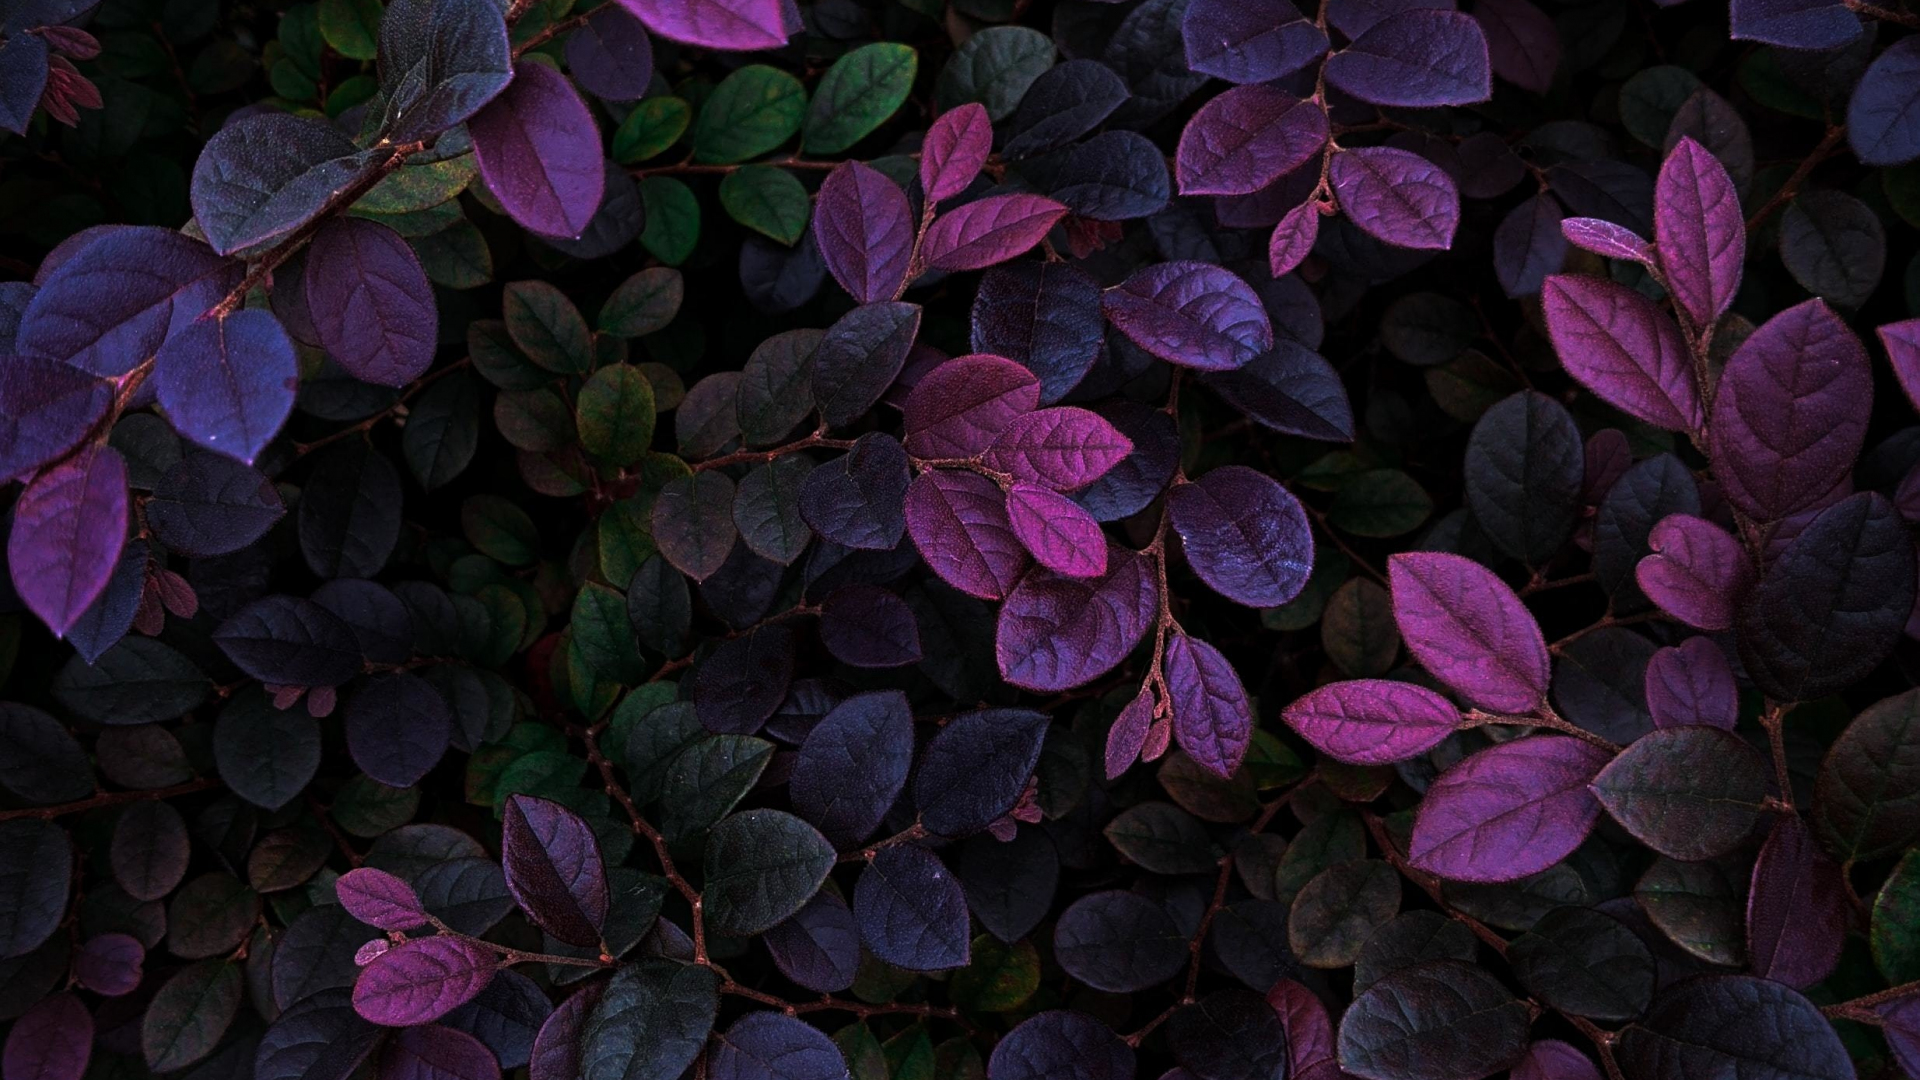 Download wallpaper 1920x1080 violet leaves, veins, branches, plants, full hd,  hdtv, fhd, 1080p wallpaper, 1920x1080 hd background, 26246